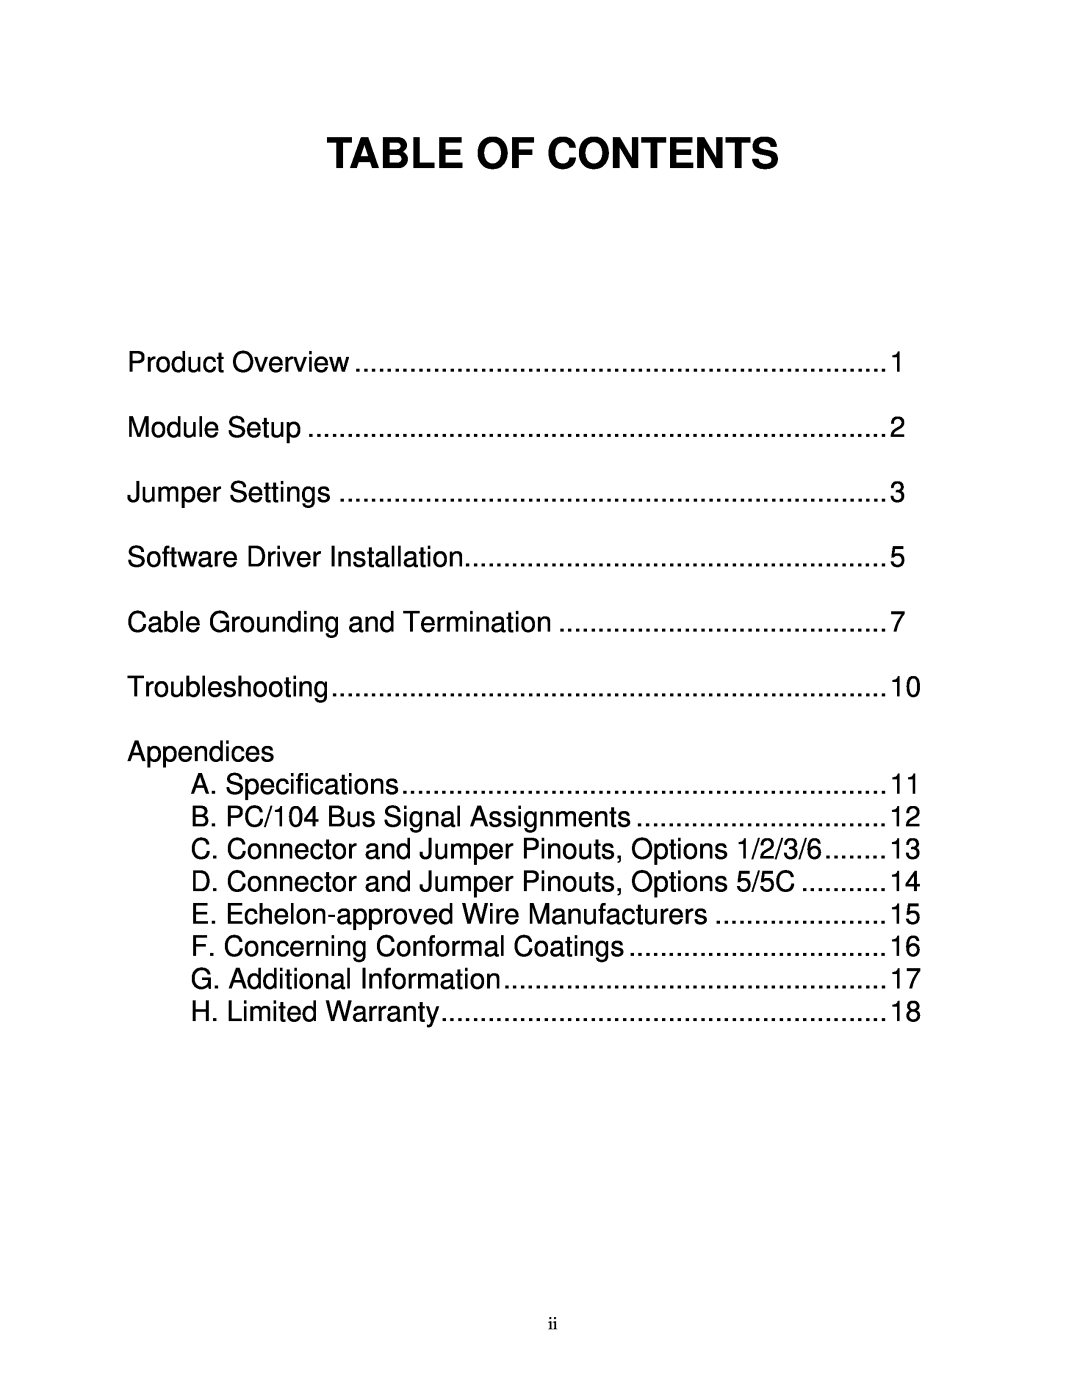 Vista LM104-P50 manual Table Of Contents 